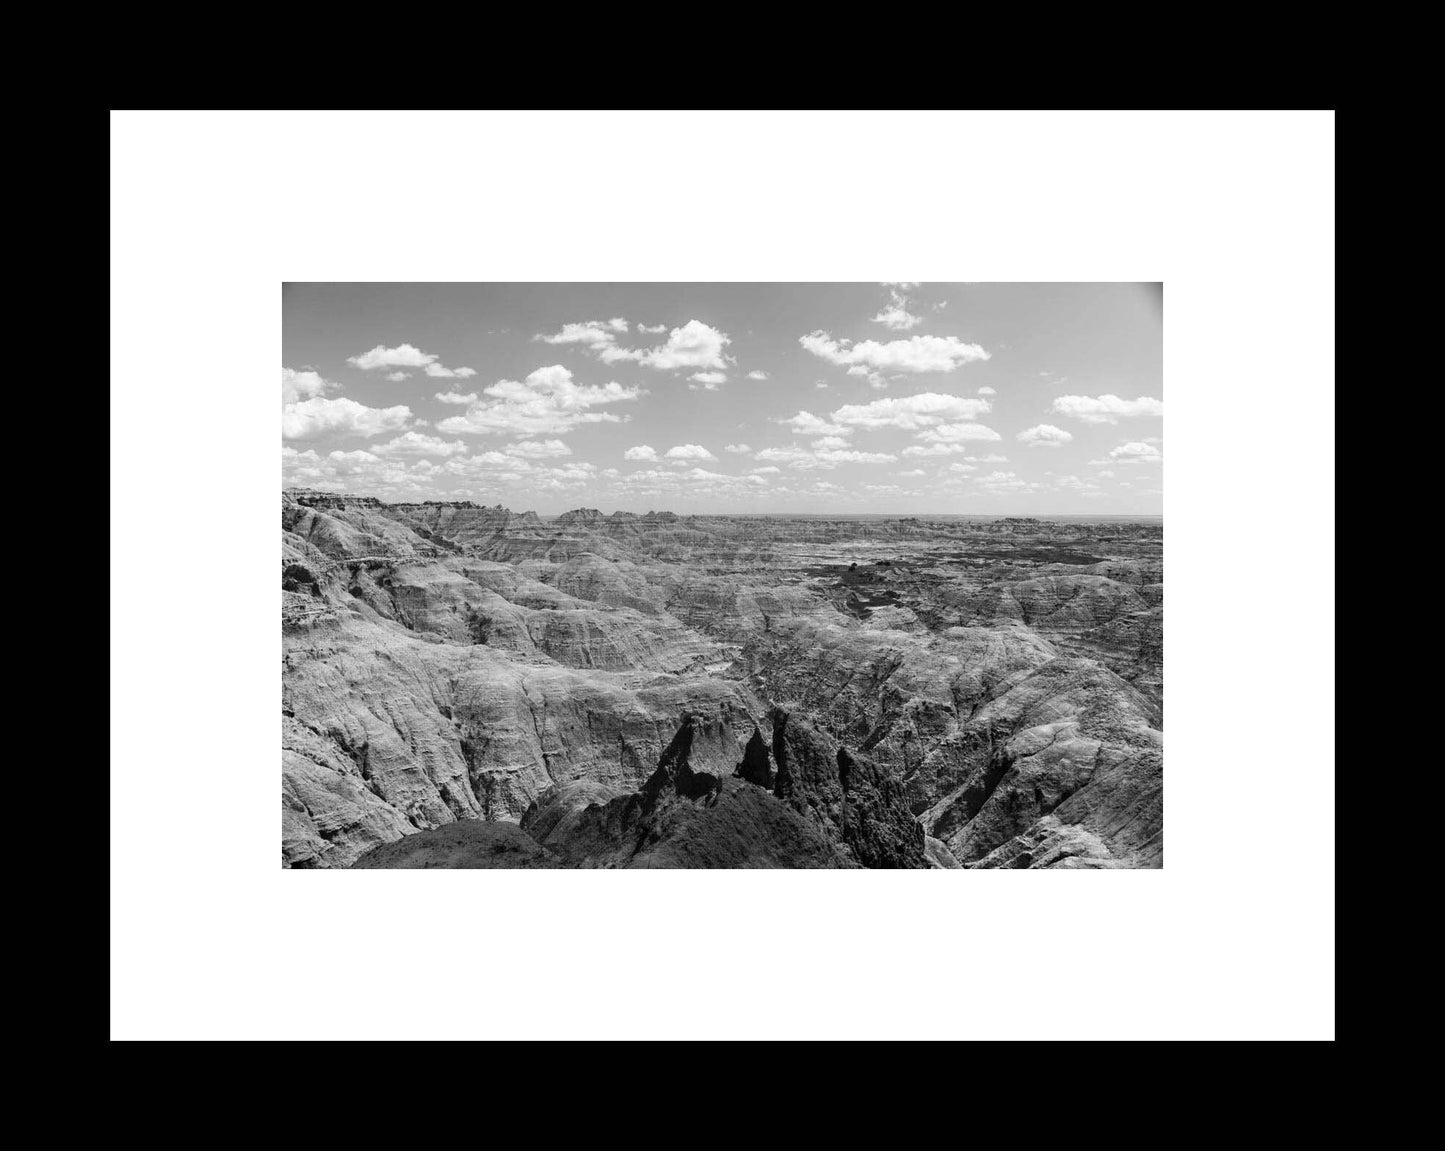 Pinnacles Overlook | Black and White Badlands Photography